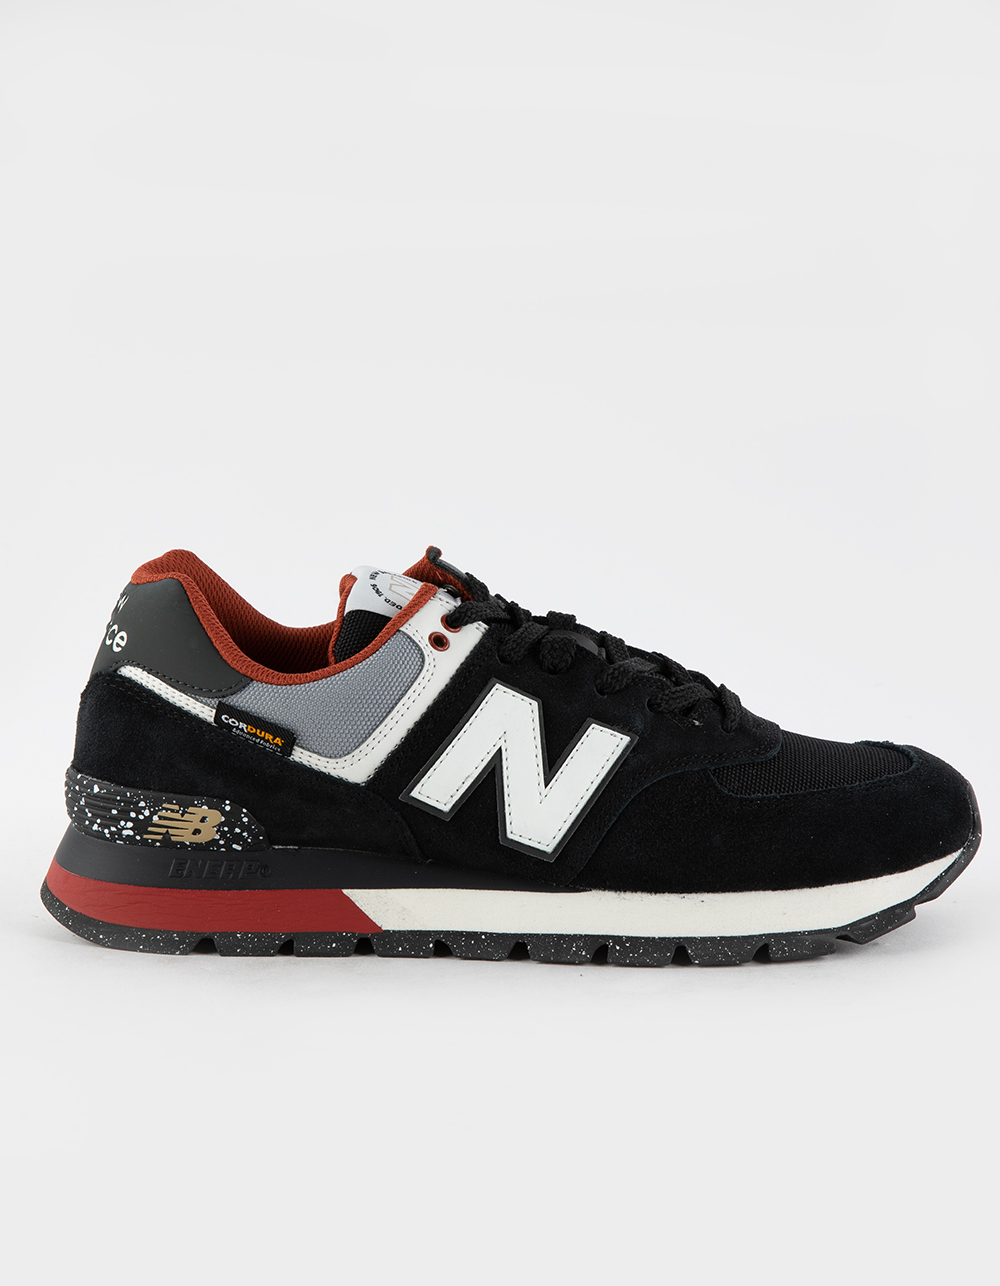 NEW BALANCE 574 Rugged Mens Shoes - BLACK COMBO | Tillys